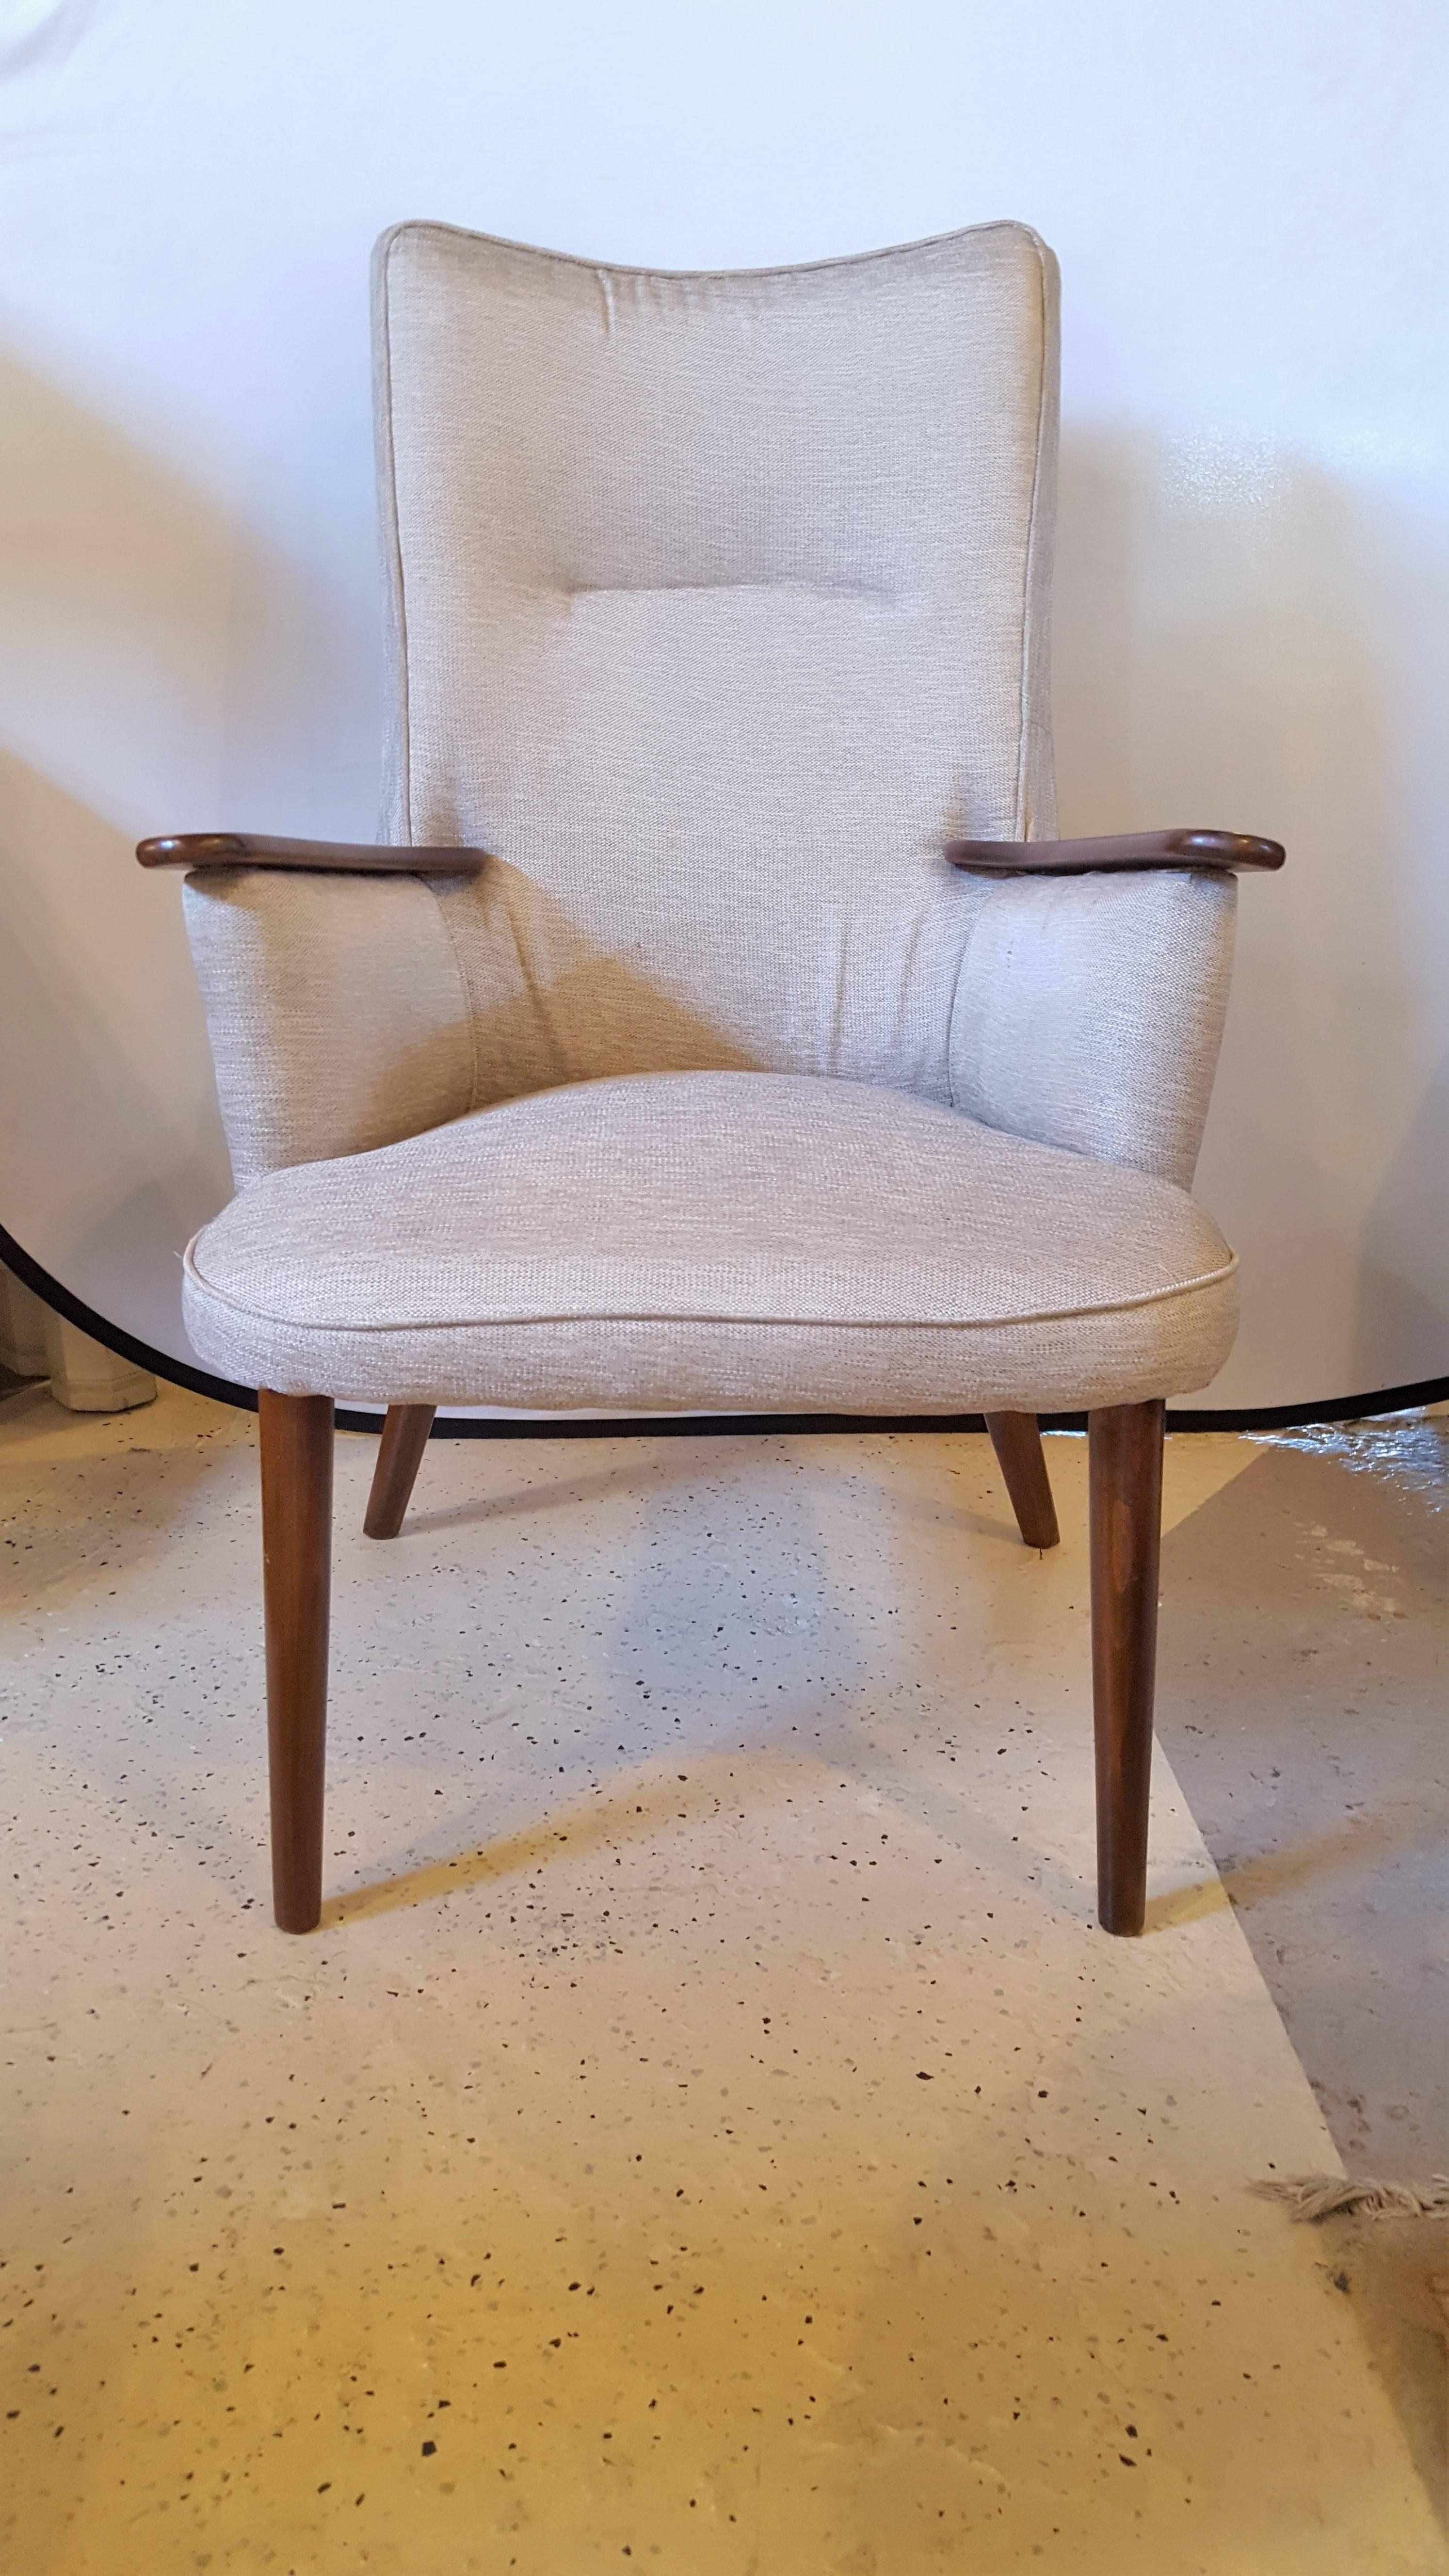 A pair of Mid-Century Modern Hansweger style armchairs. These chairs, have a rosewood frame and have been newly reupholstered. Everything about these chairs say modern, stylish and comfortable.

Seat height - 18 inches.